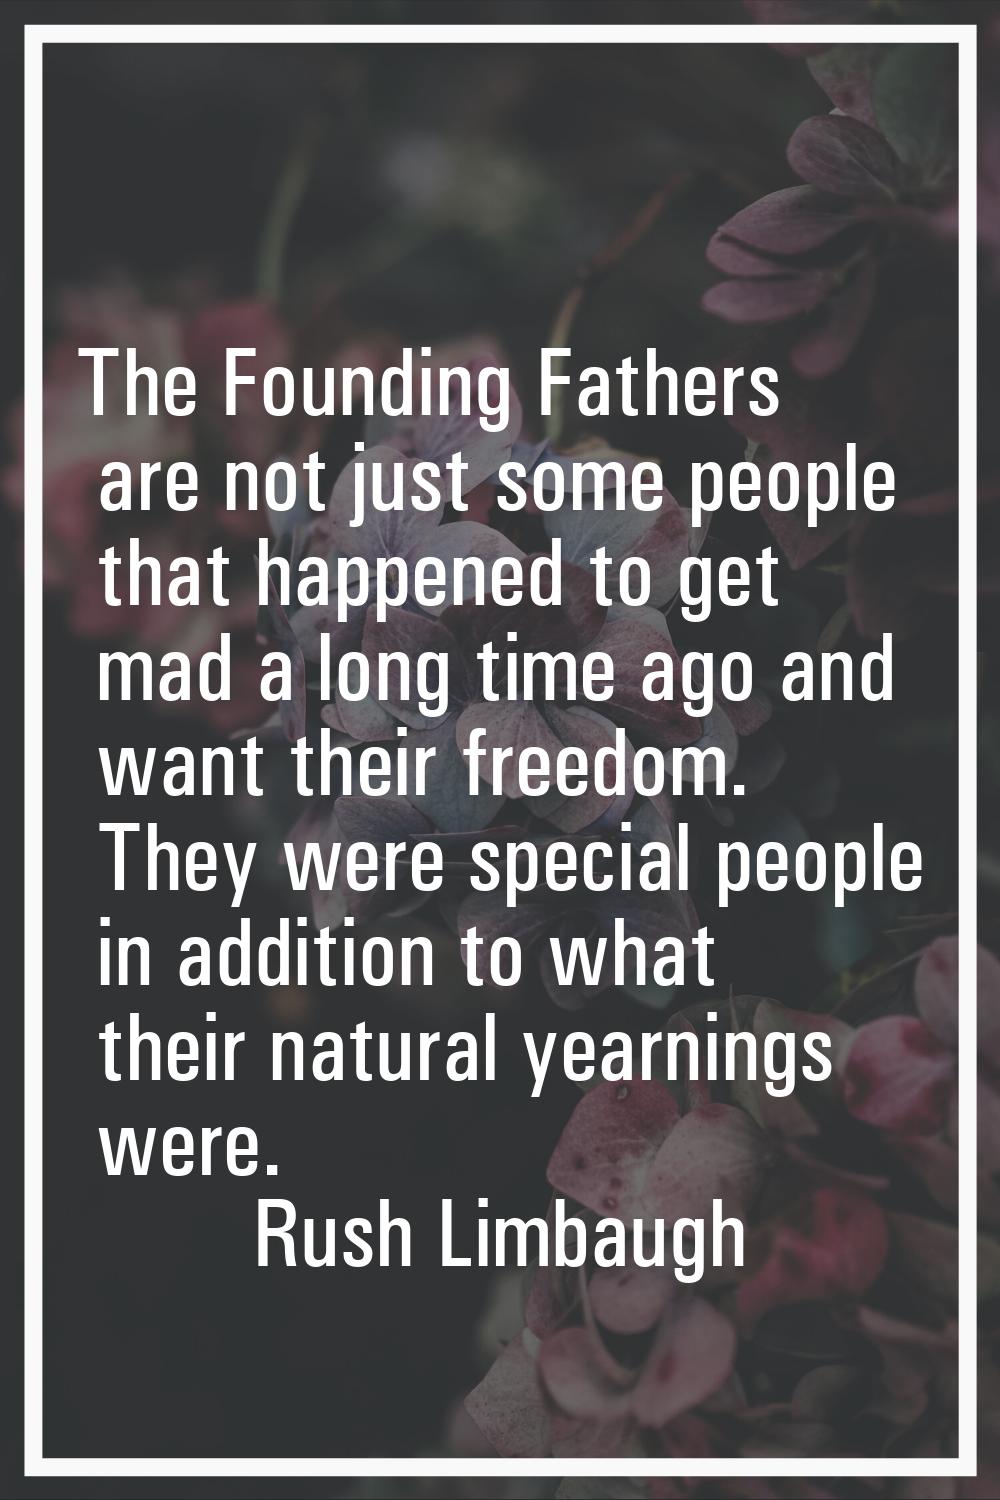 The Founding Fathers are not just some people that happened to get mad a long time ago and want the